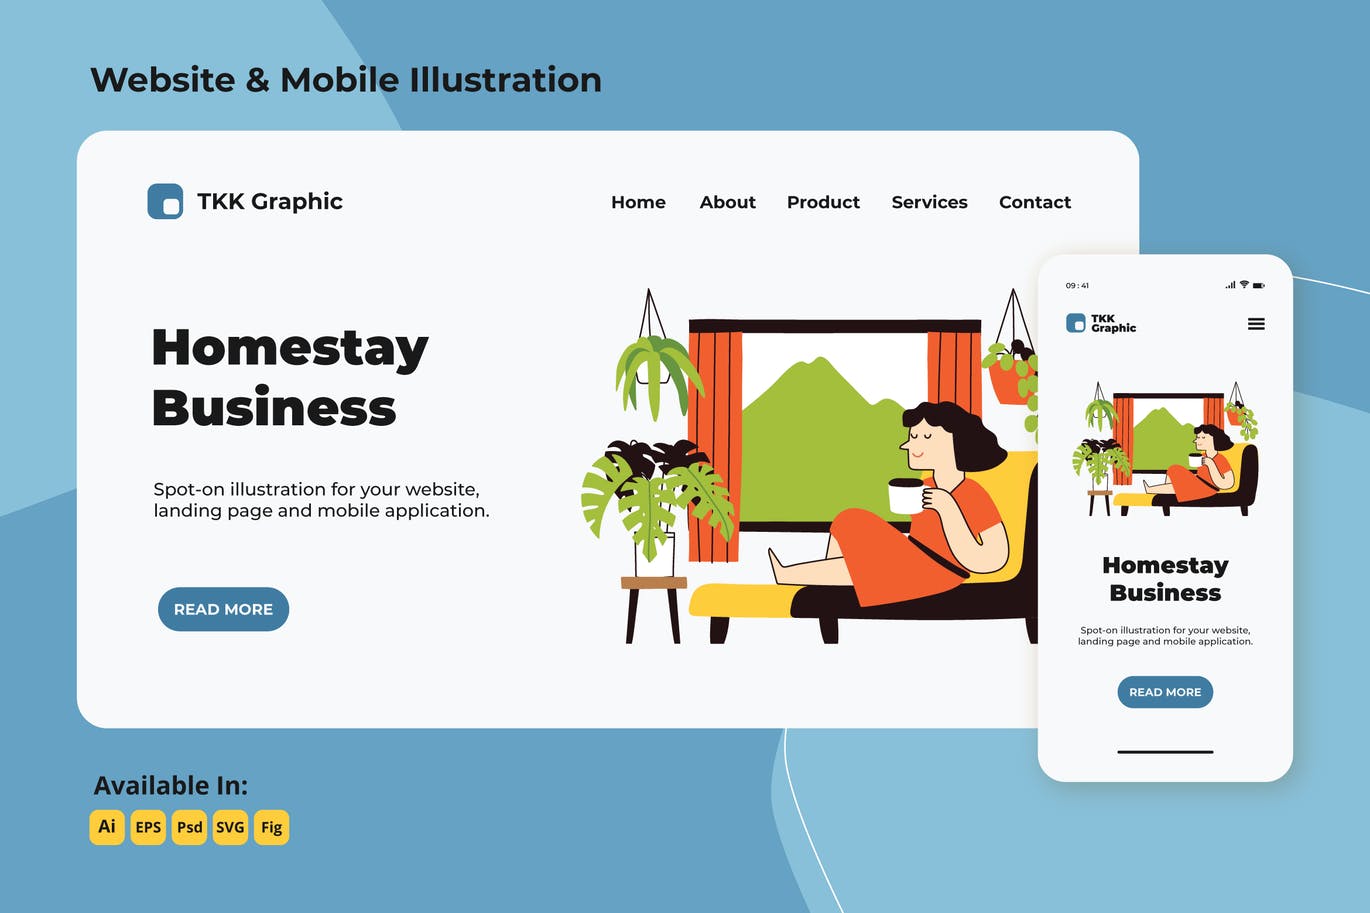 Homestay Business web and mobile